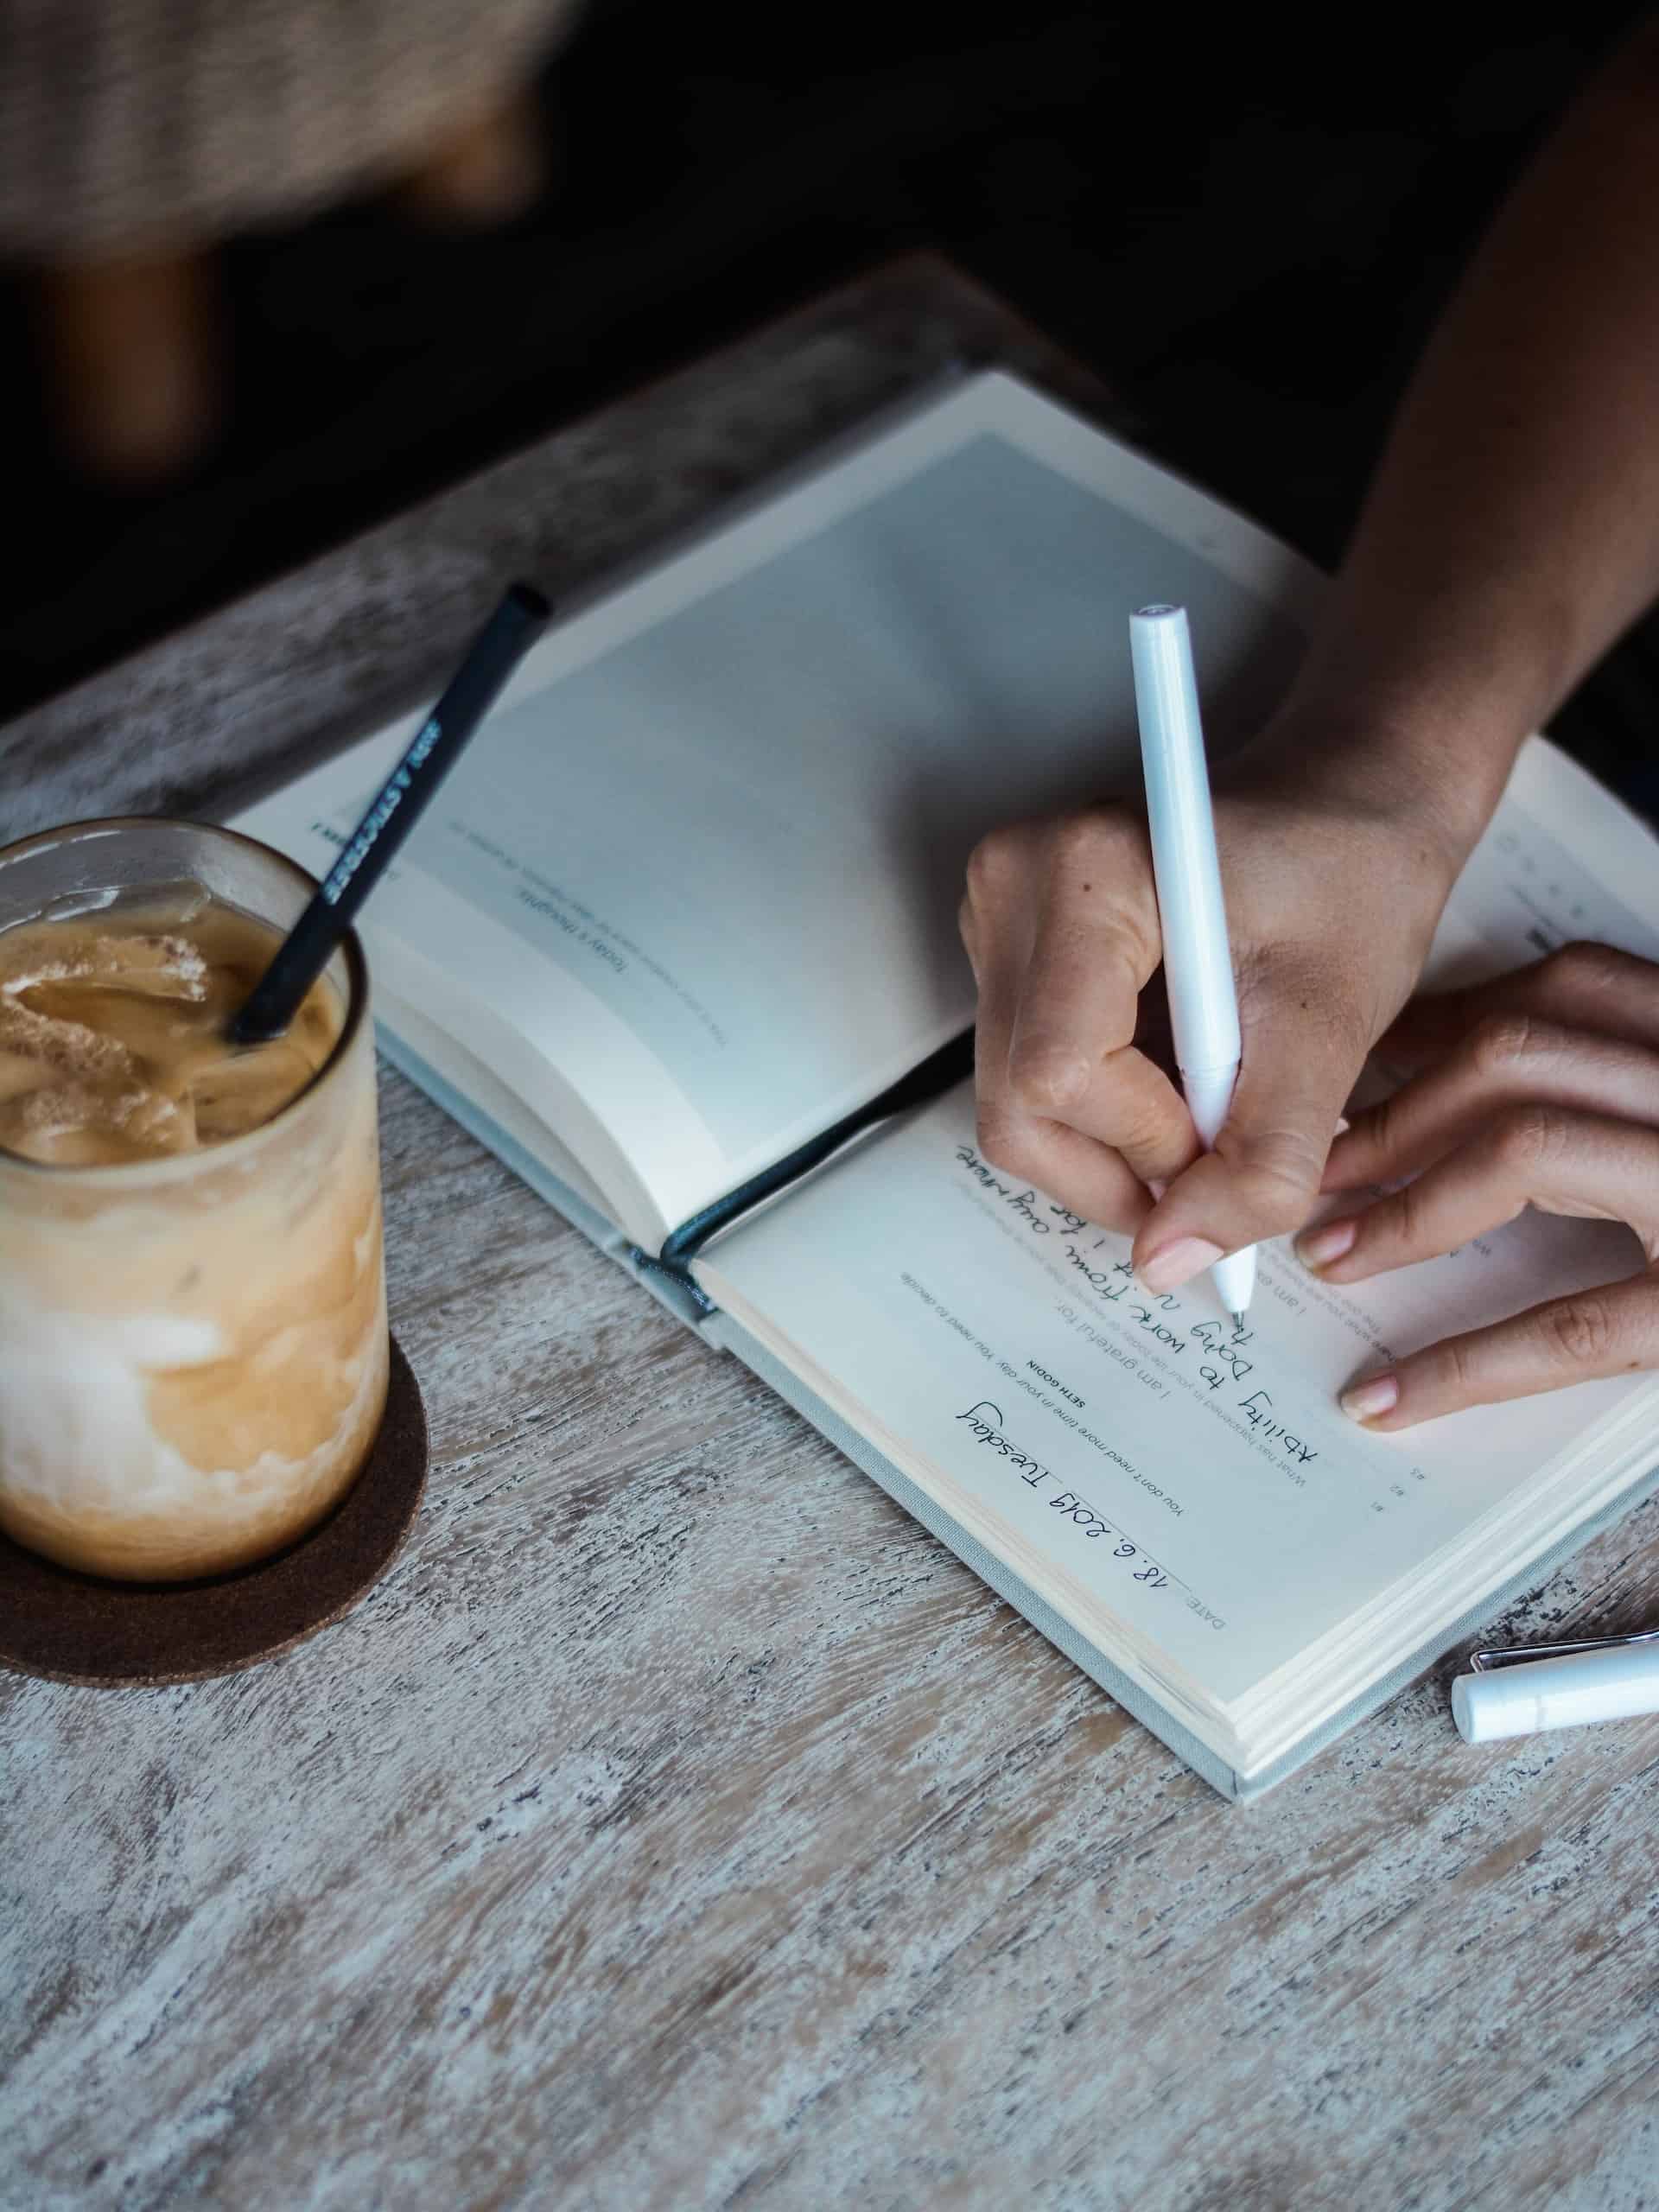 Photo of arms writing in a journal with iced latte on the desk in front